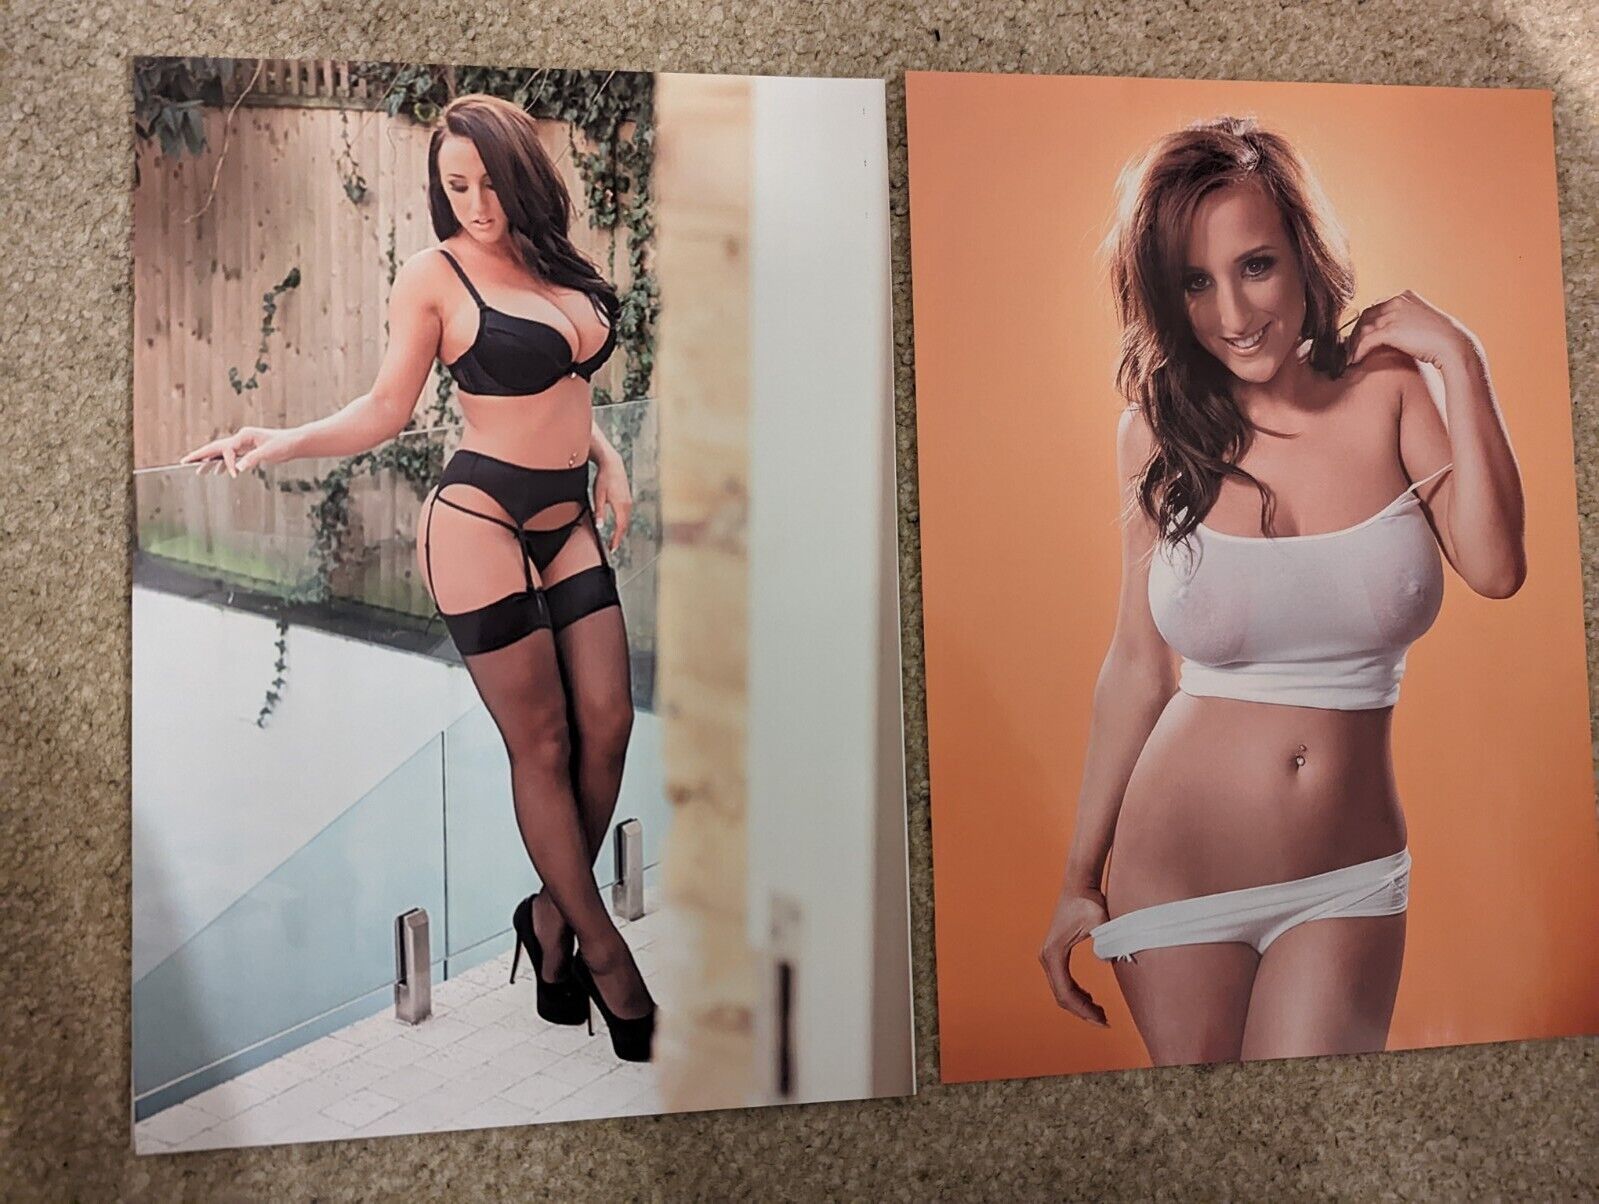 Stacey Poole Photos x 2 A4 PRINT